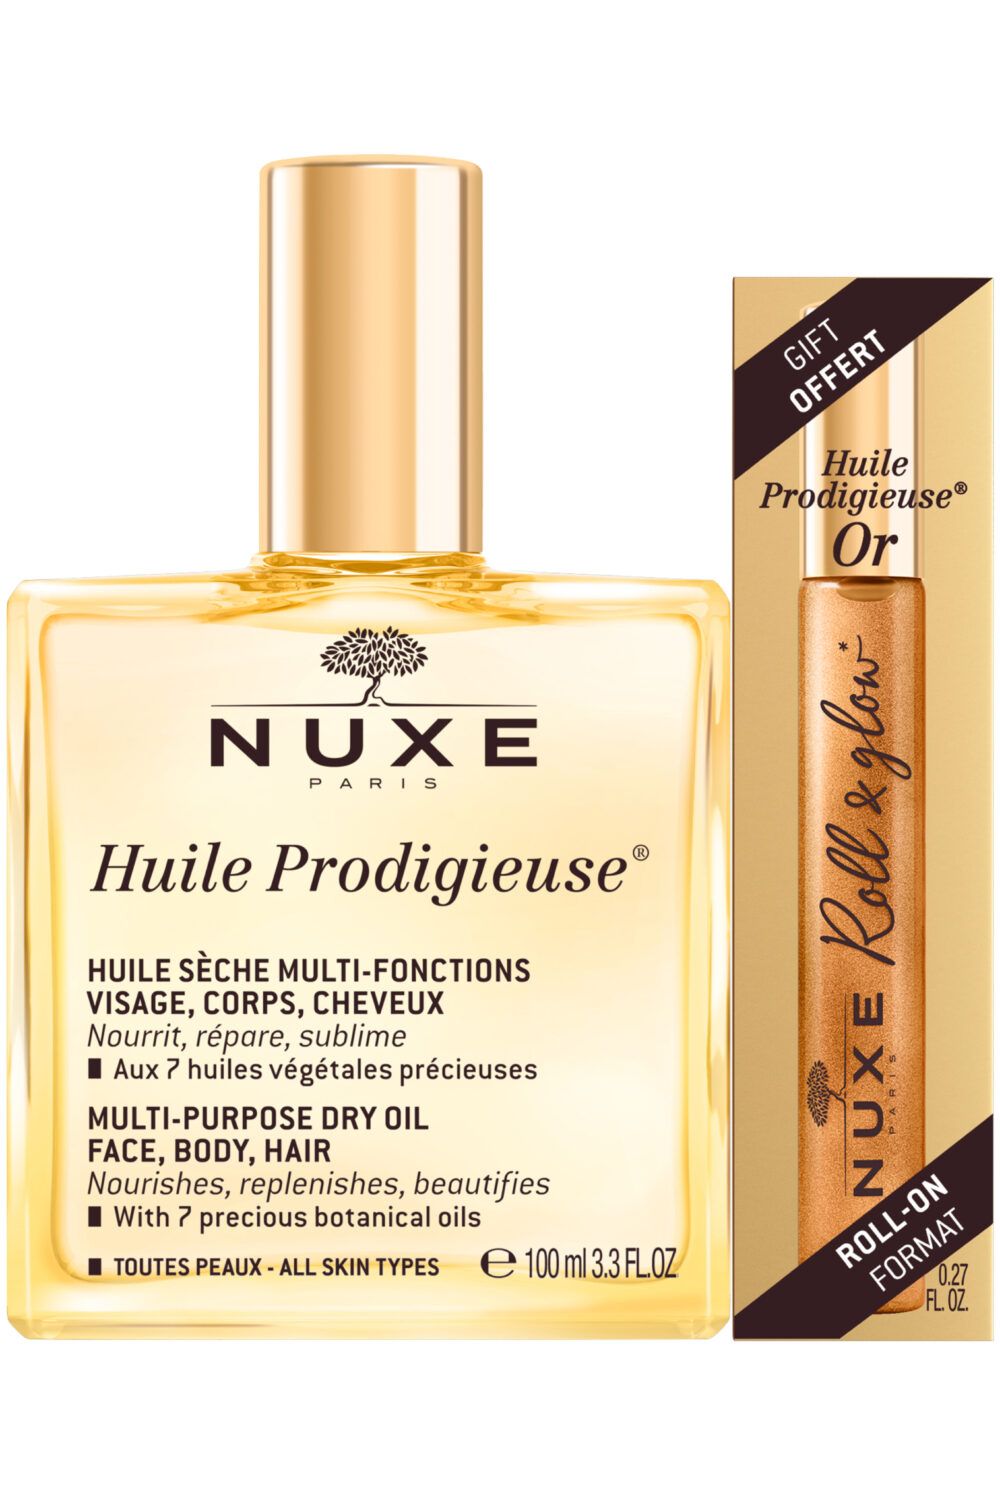 Nuxe - Duo Nuxe Huile Prodigieuse® 100ml et Huile Prodigieuse® Or format roll on 8ml offert